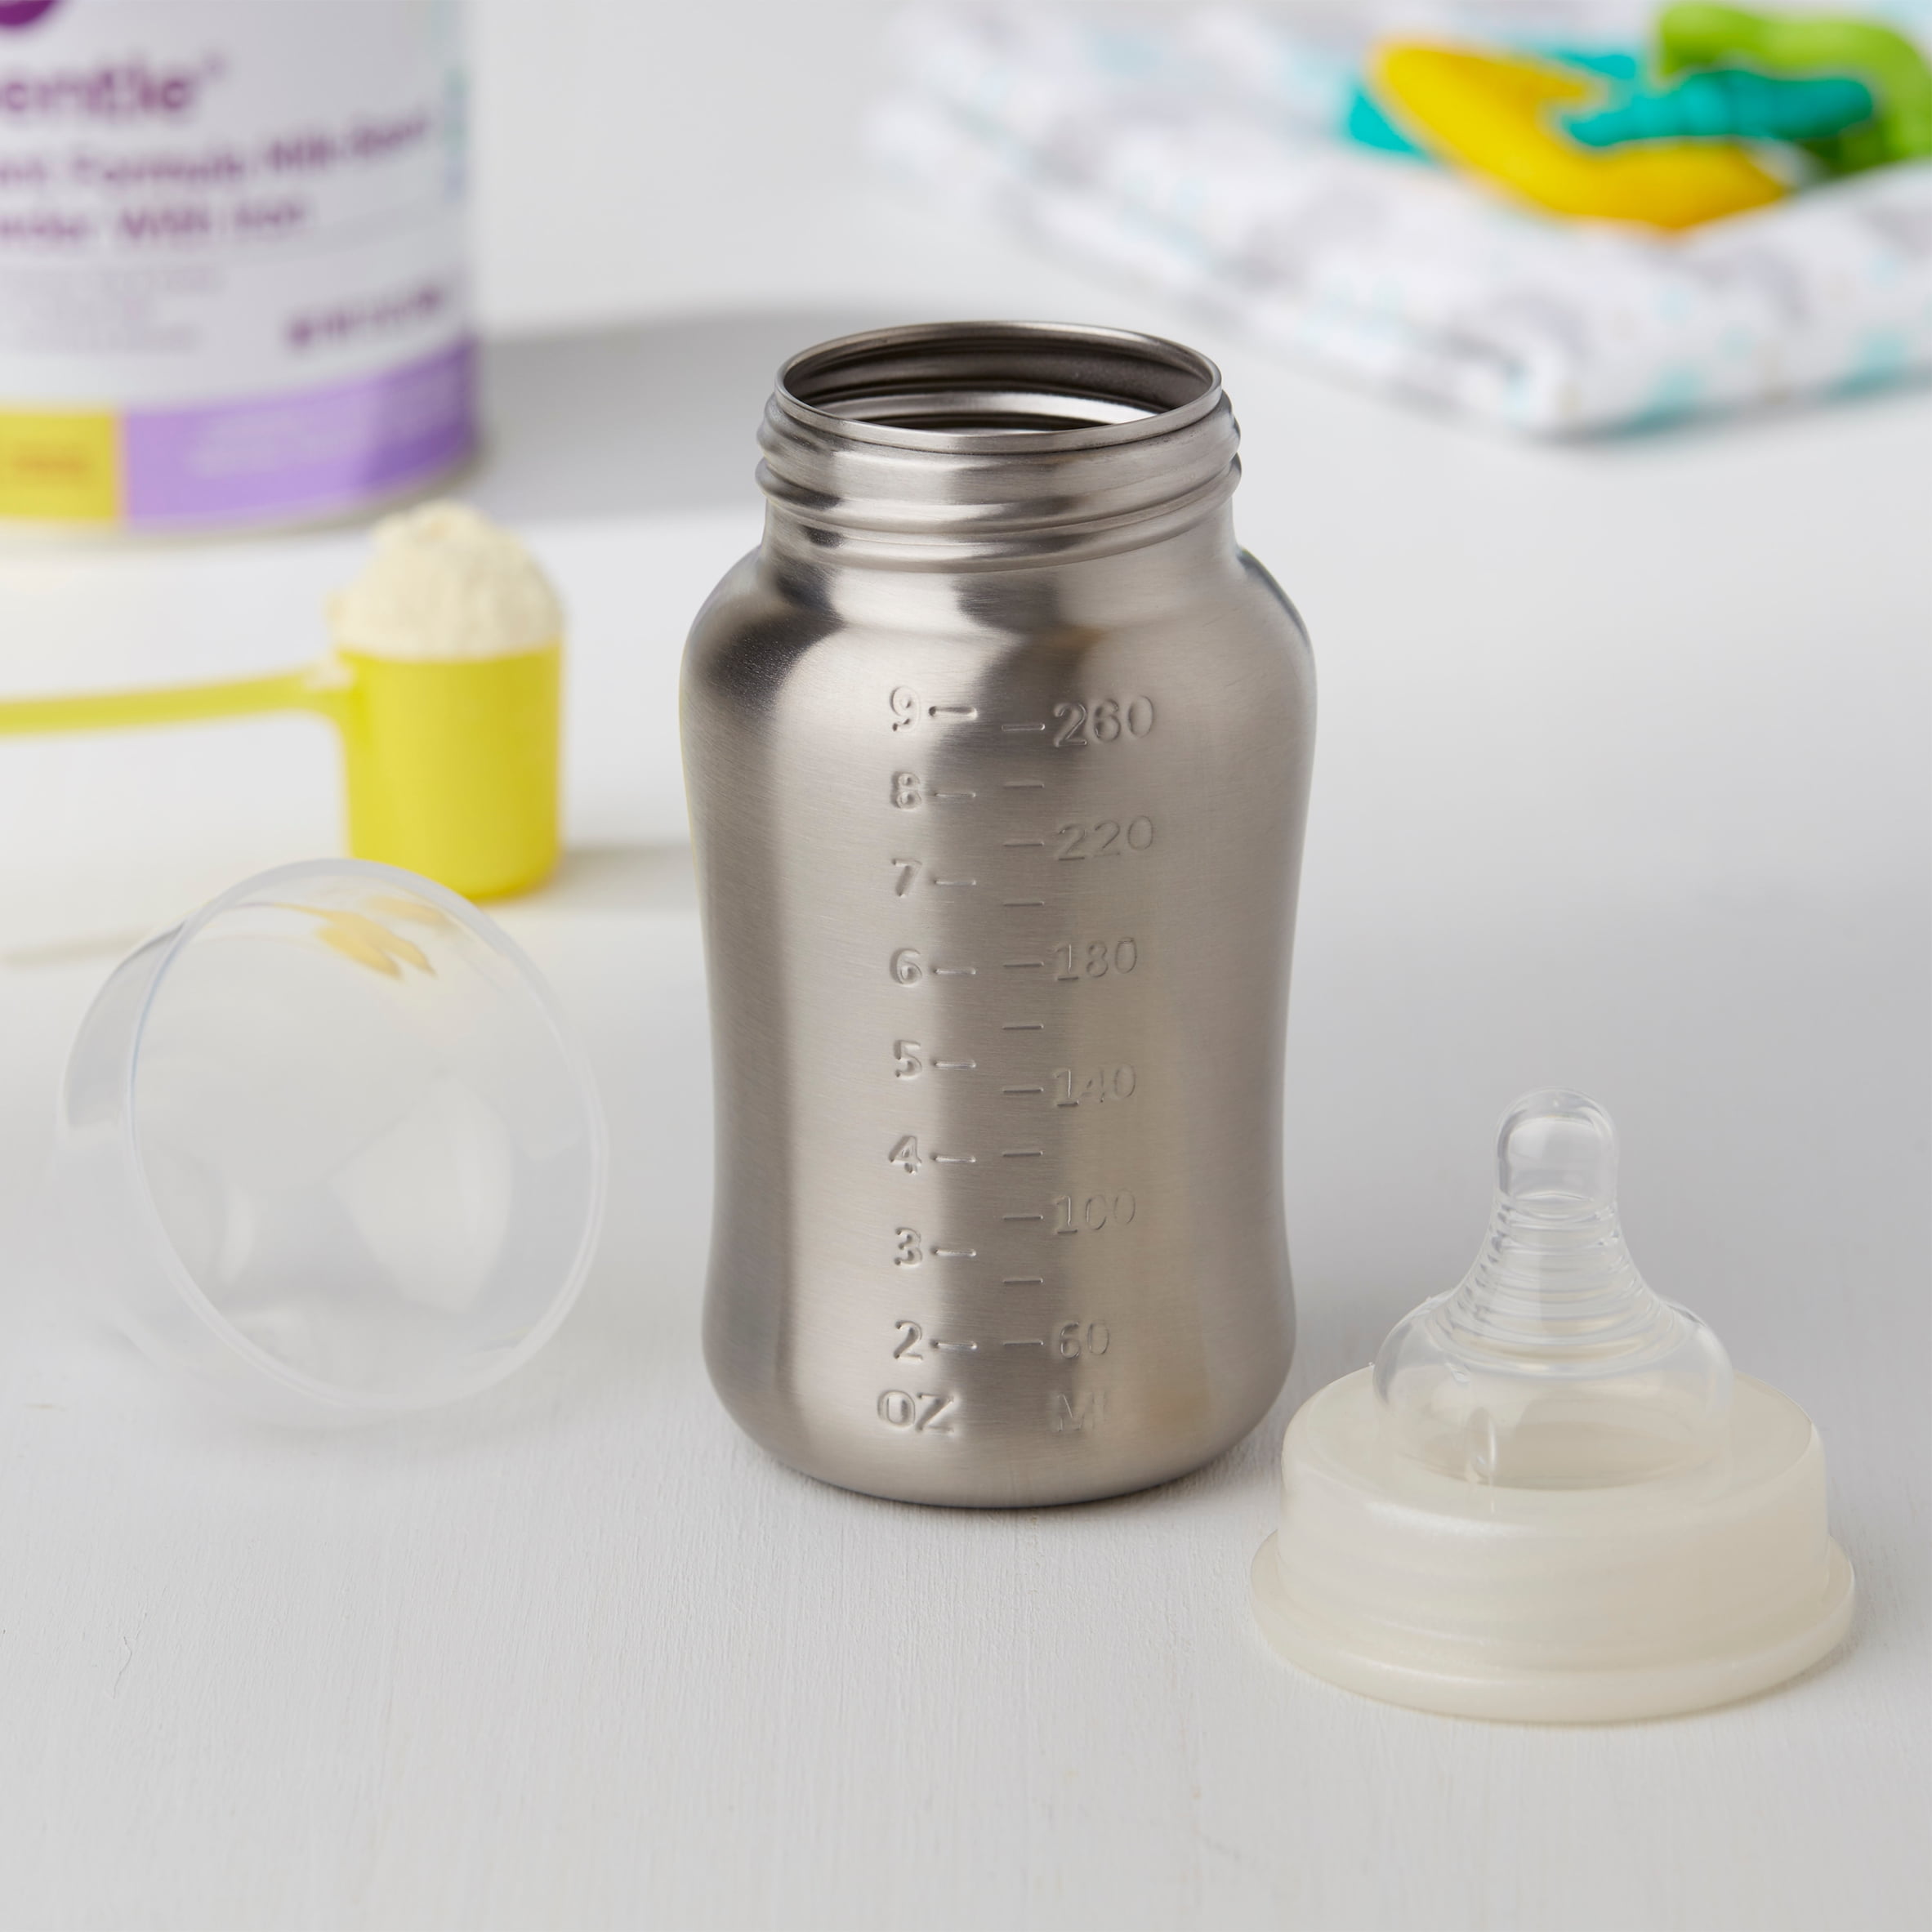 eco baba Baby Bottle, Stainless Steel, BPA Free, 12 oz